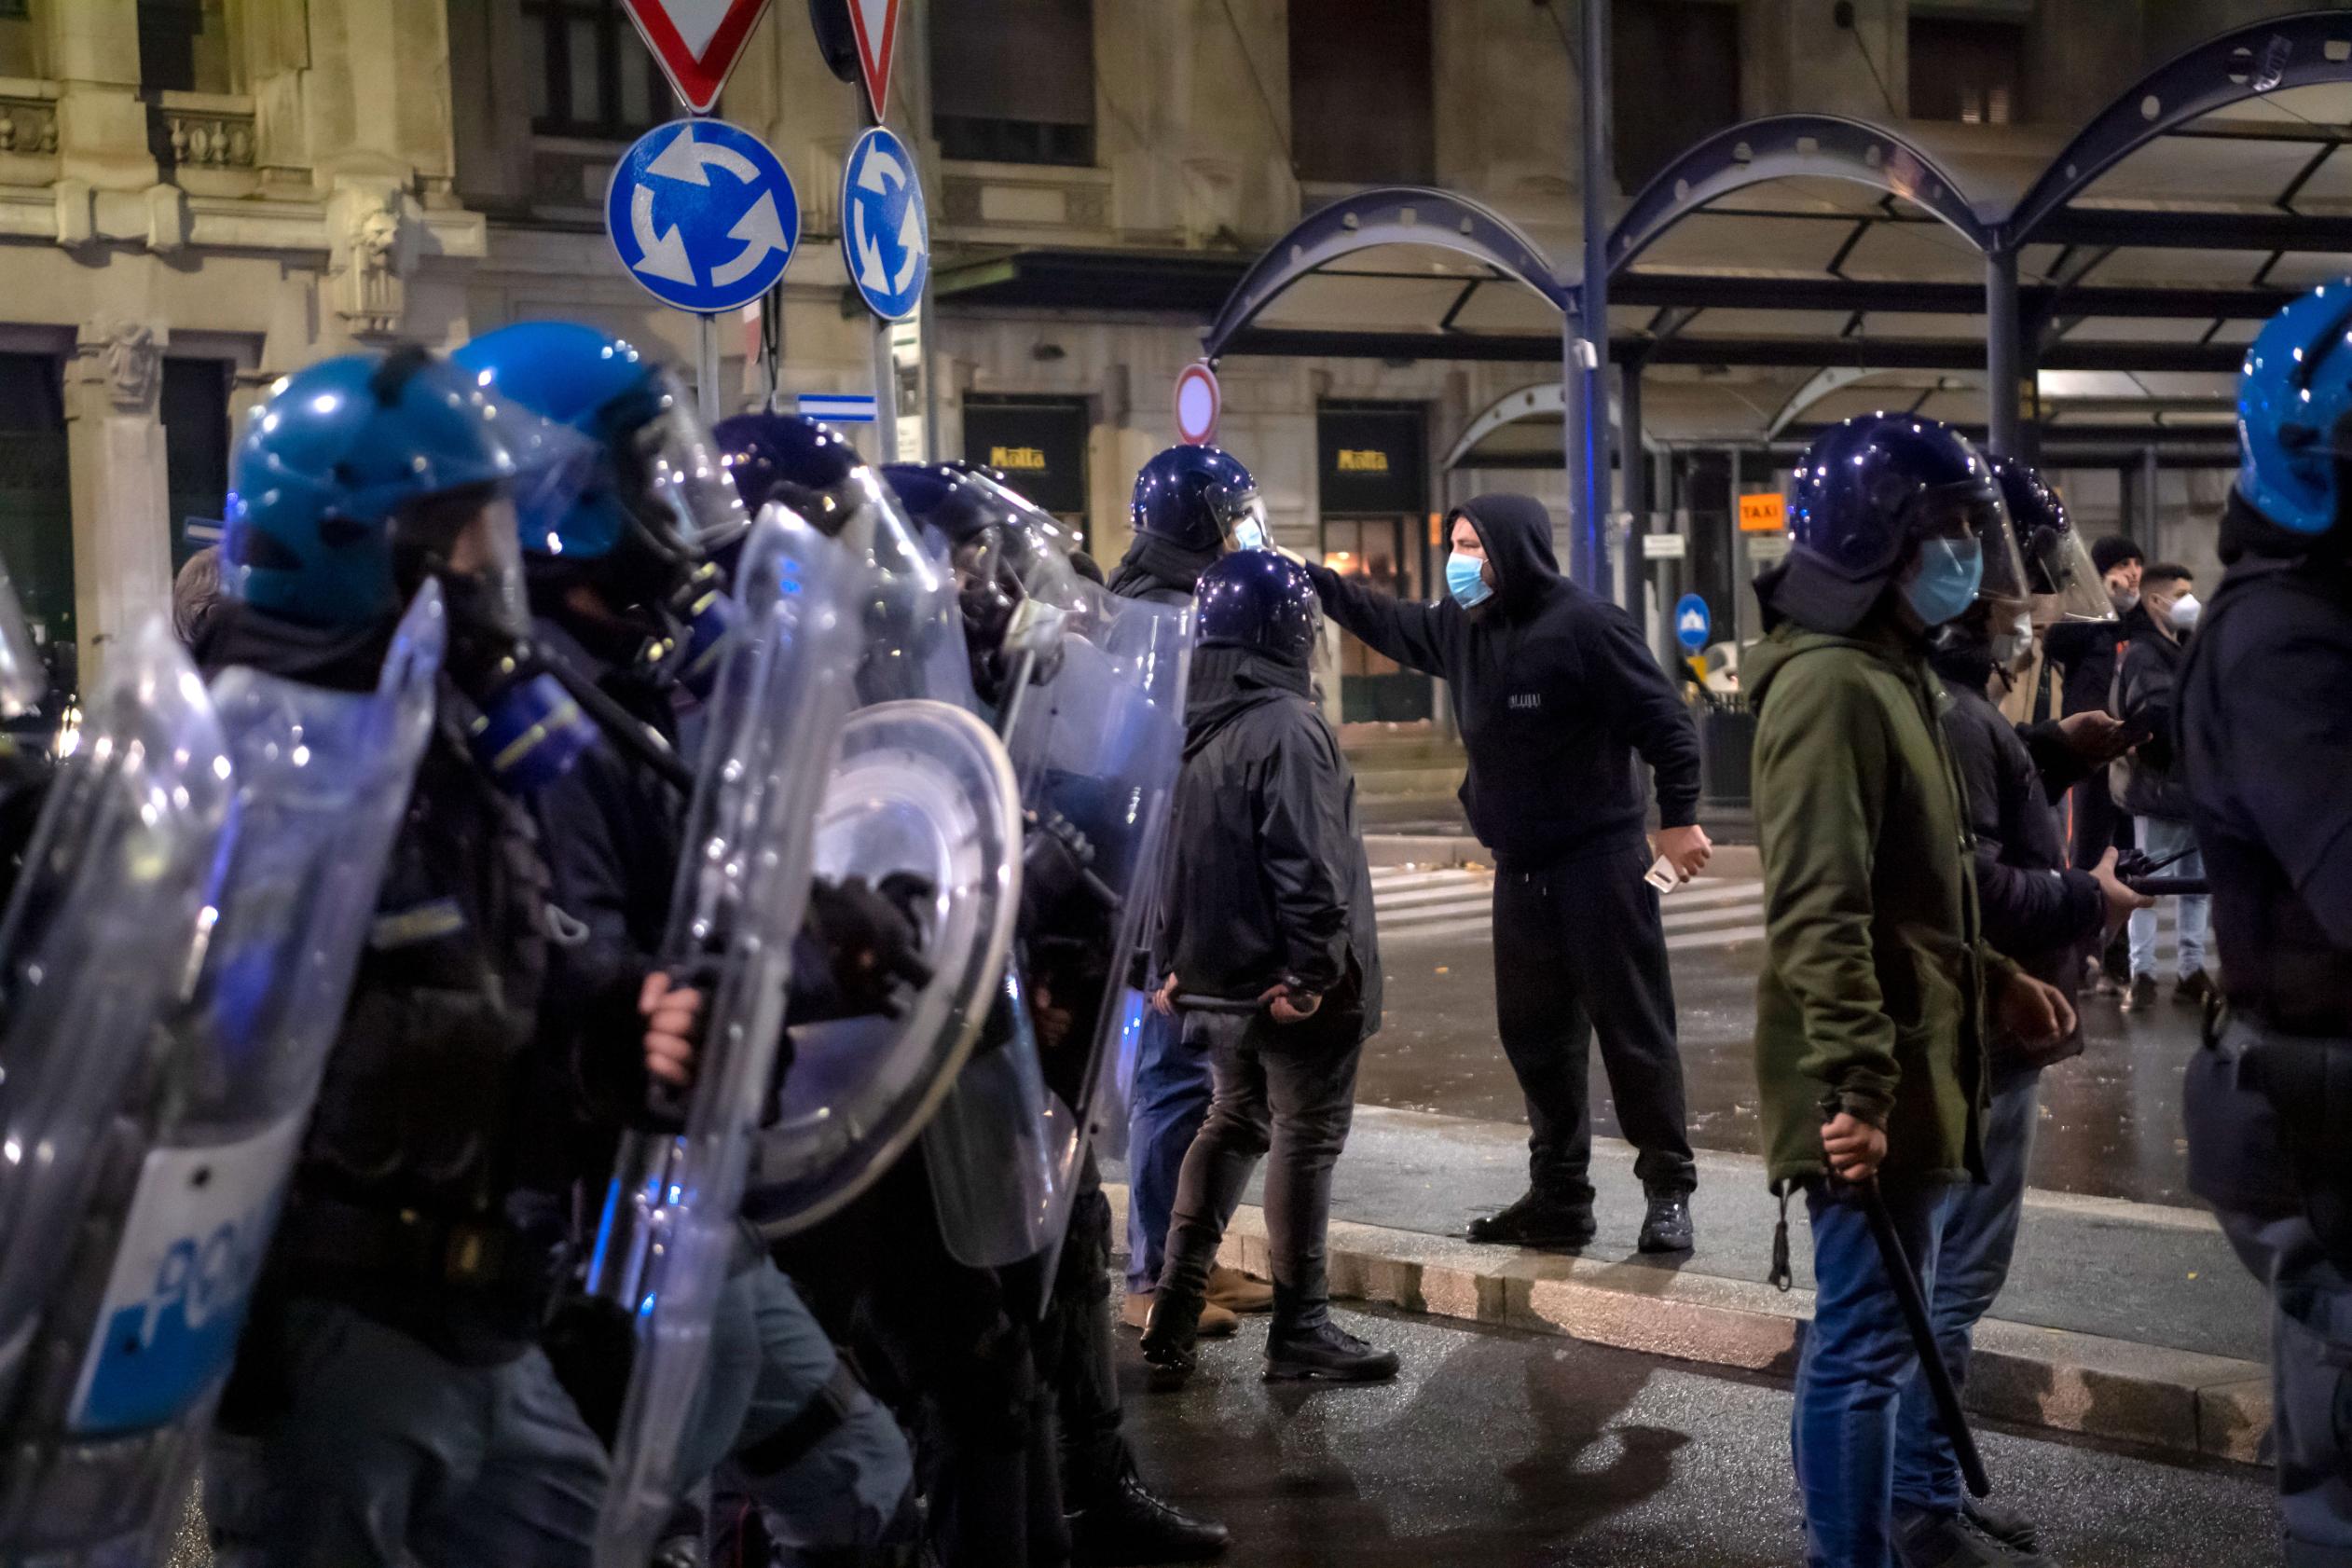 A protester confronts police officers and the Carabinieri during a coronavirus restrictions protest on October 26 in Milan, Italy. 